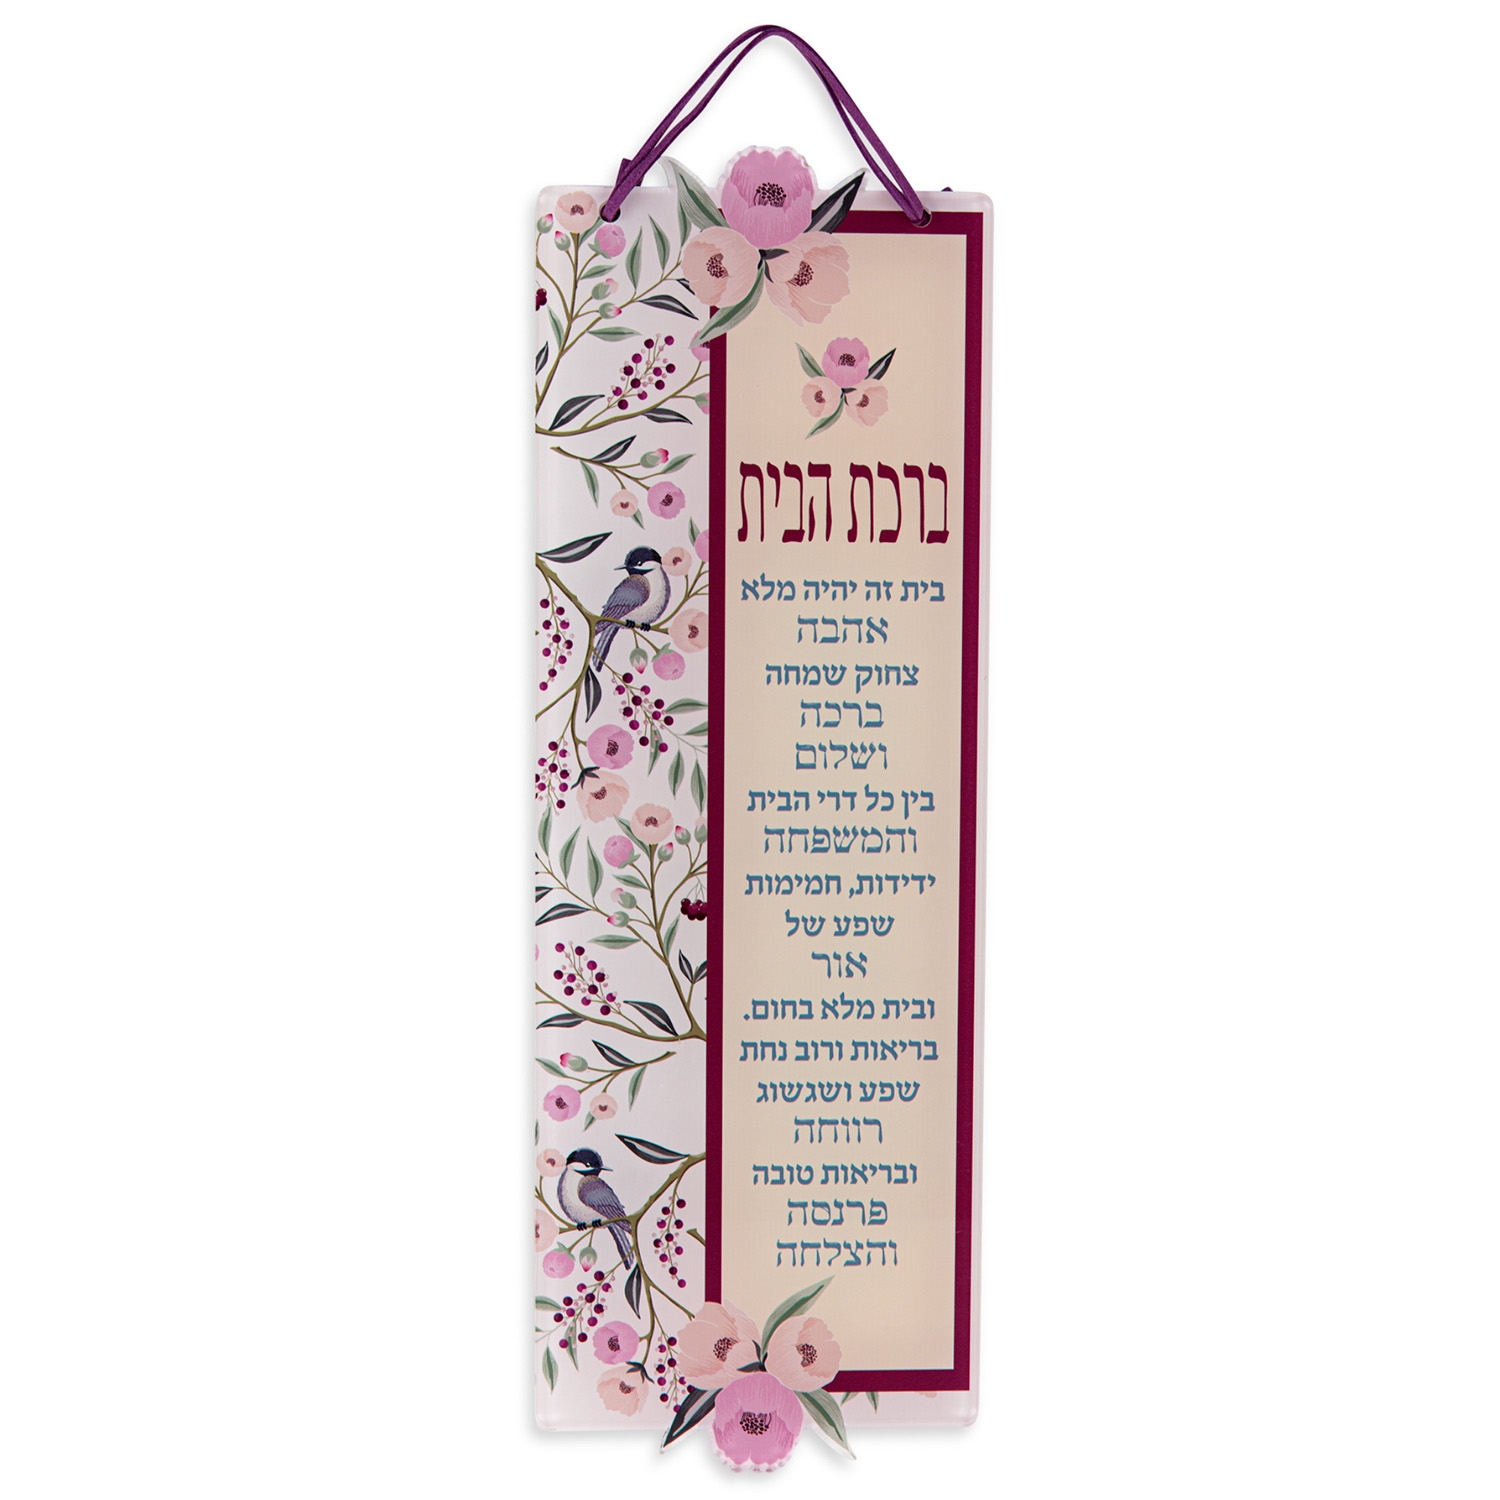 Jewish House Blessing Large with Flowers and Birds (Hebrew) - 1